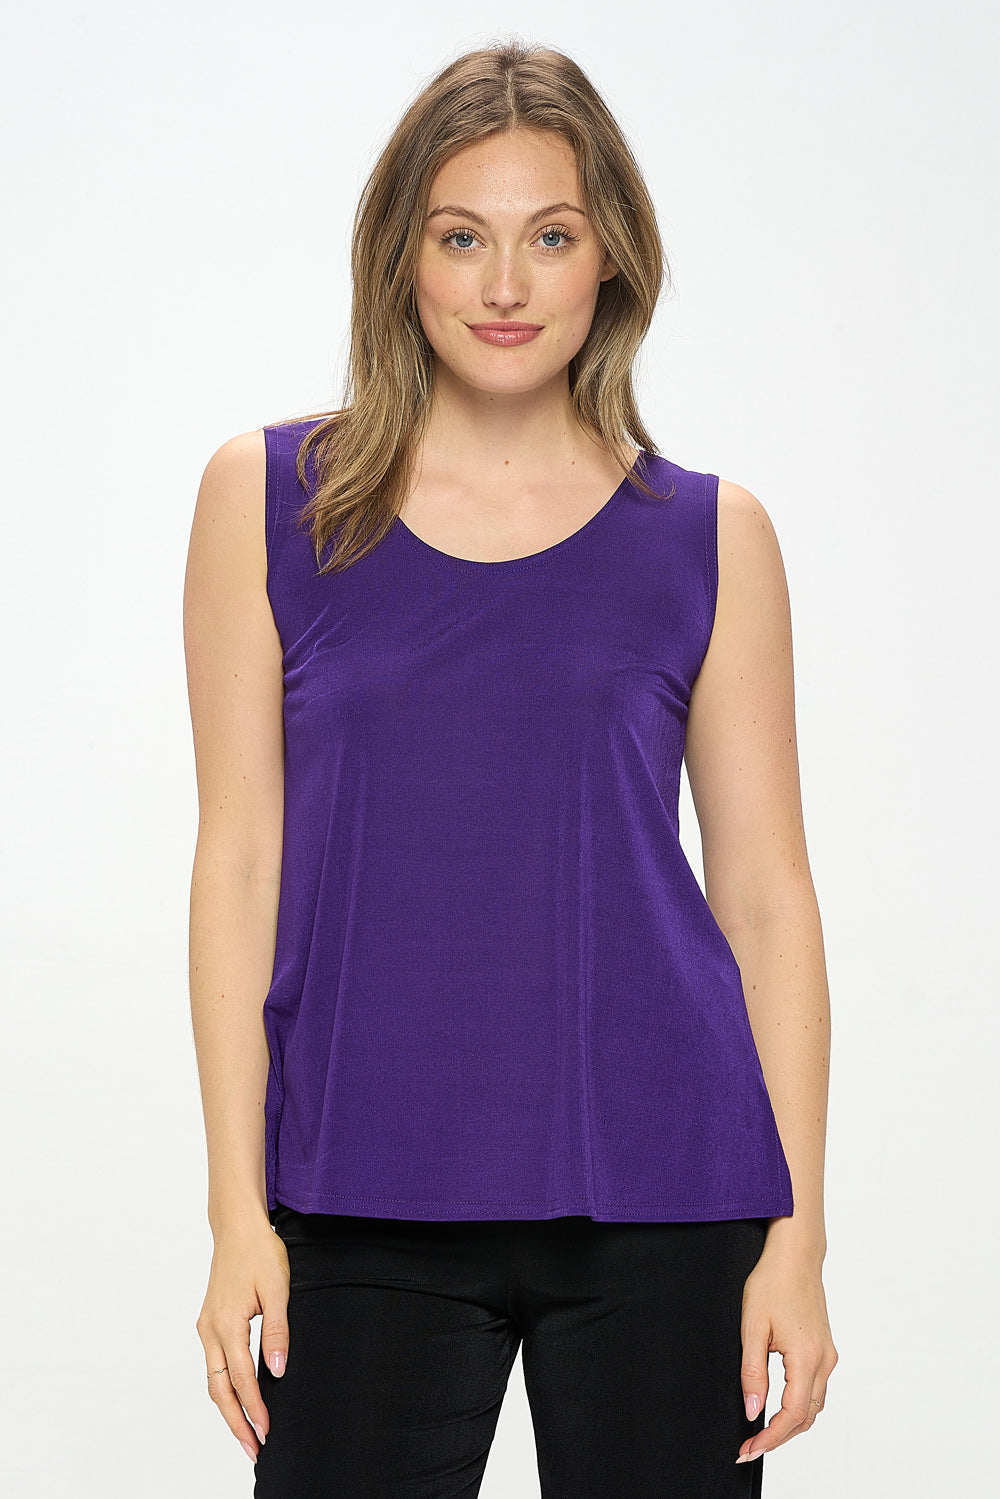 BNS Solid Sleeveless Tank Top-2060BN-TRS1